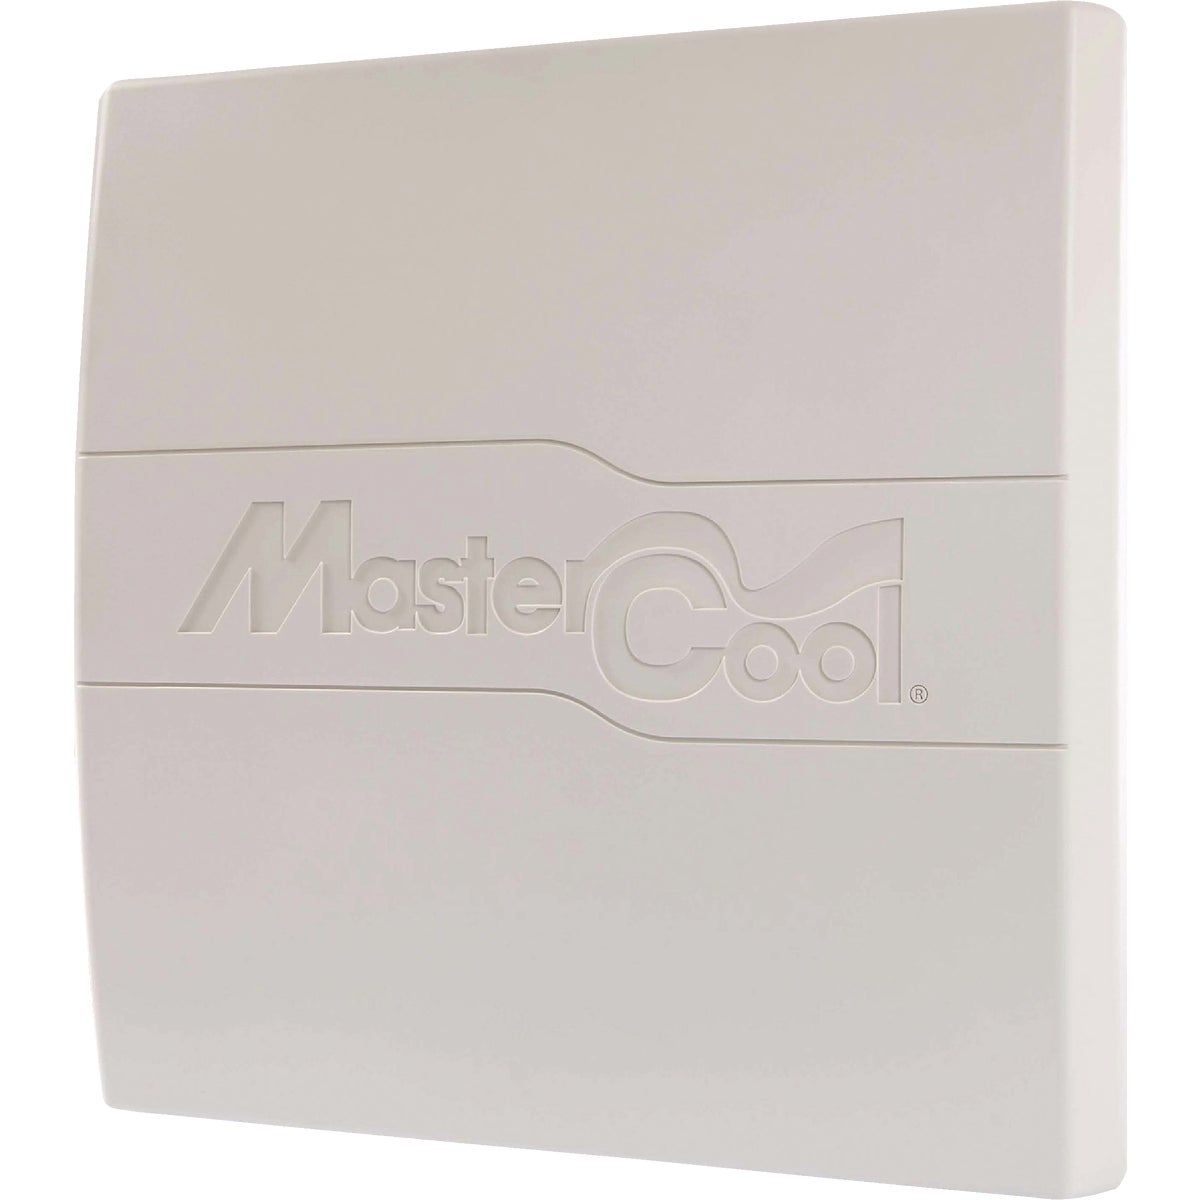 MasterCool 22.25 In. W x 2.13 In. D x 22 In. H Polystyrene Interior Evaporative Cooler Cover